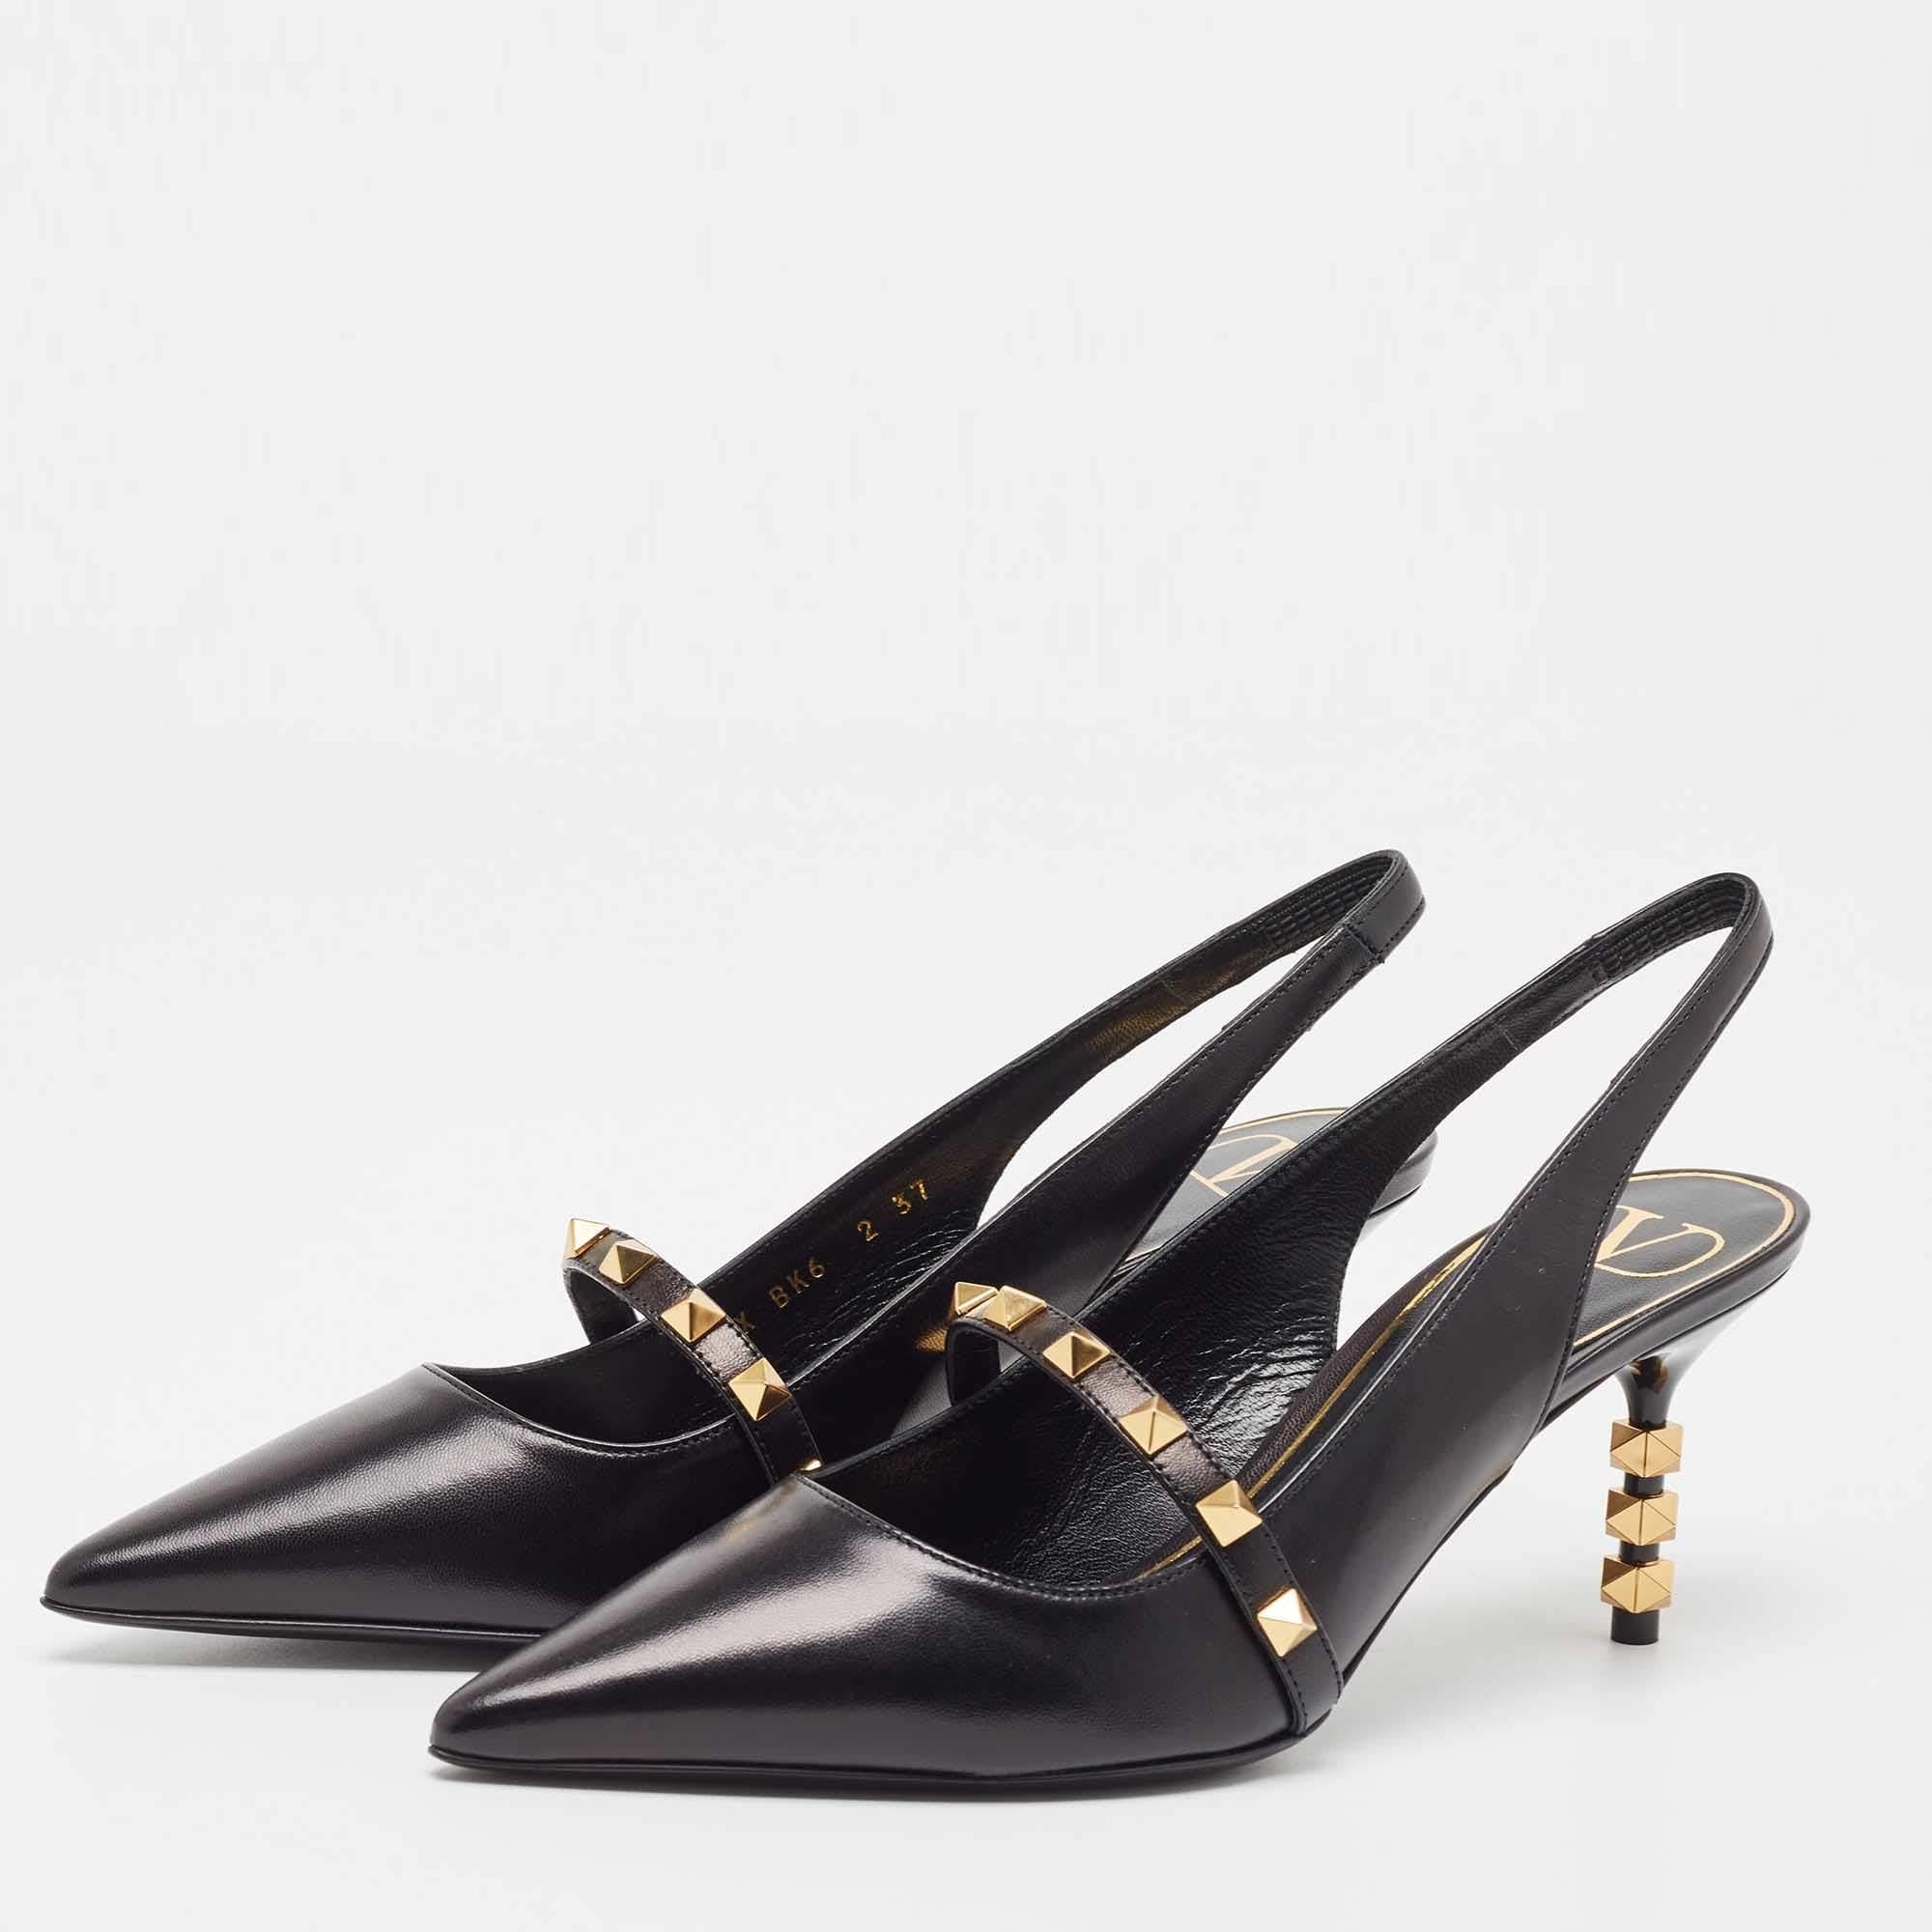 Exhibit an elegant style with this pair of Valentino black pumps. These elegant shoes are crafted from quality materials. They are set on durable soles and sleek heels.

Includes: Original Dustbag, Original Box, Info Booklet, Extra Embellishment